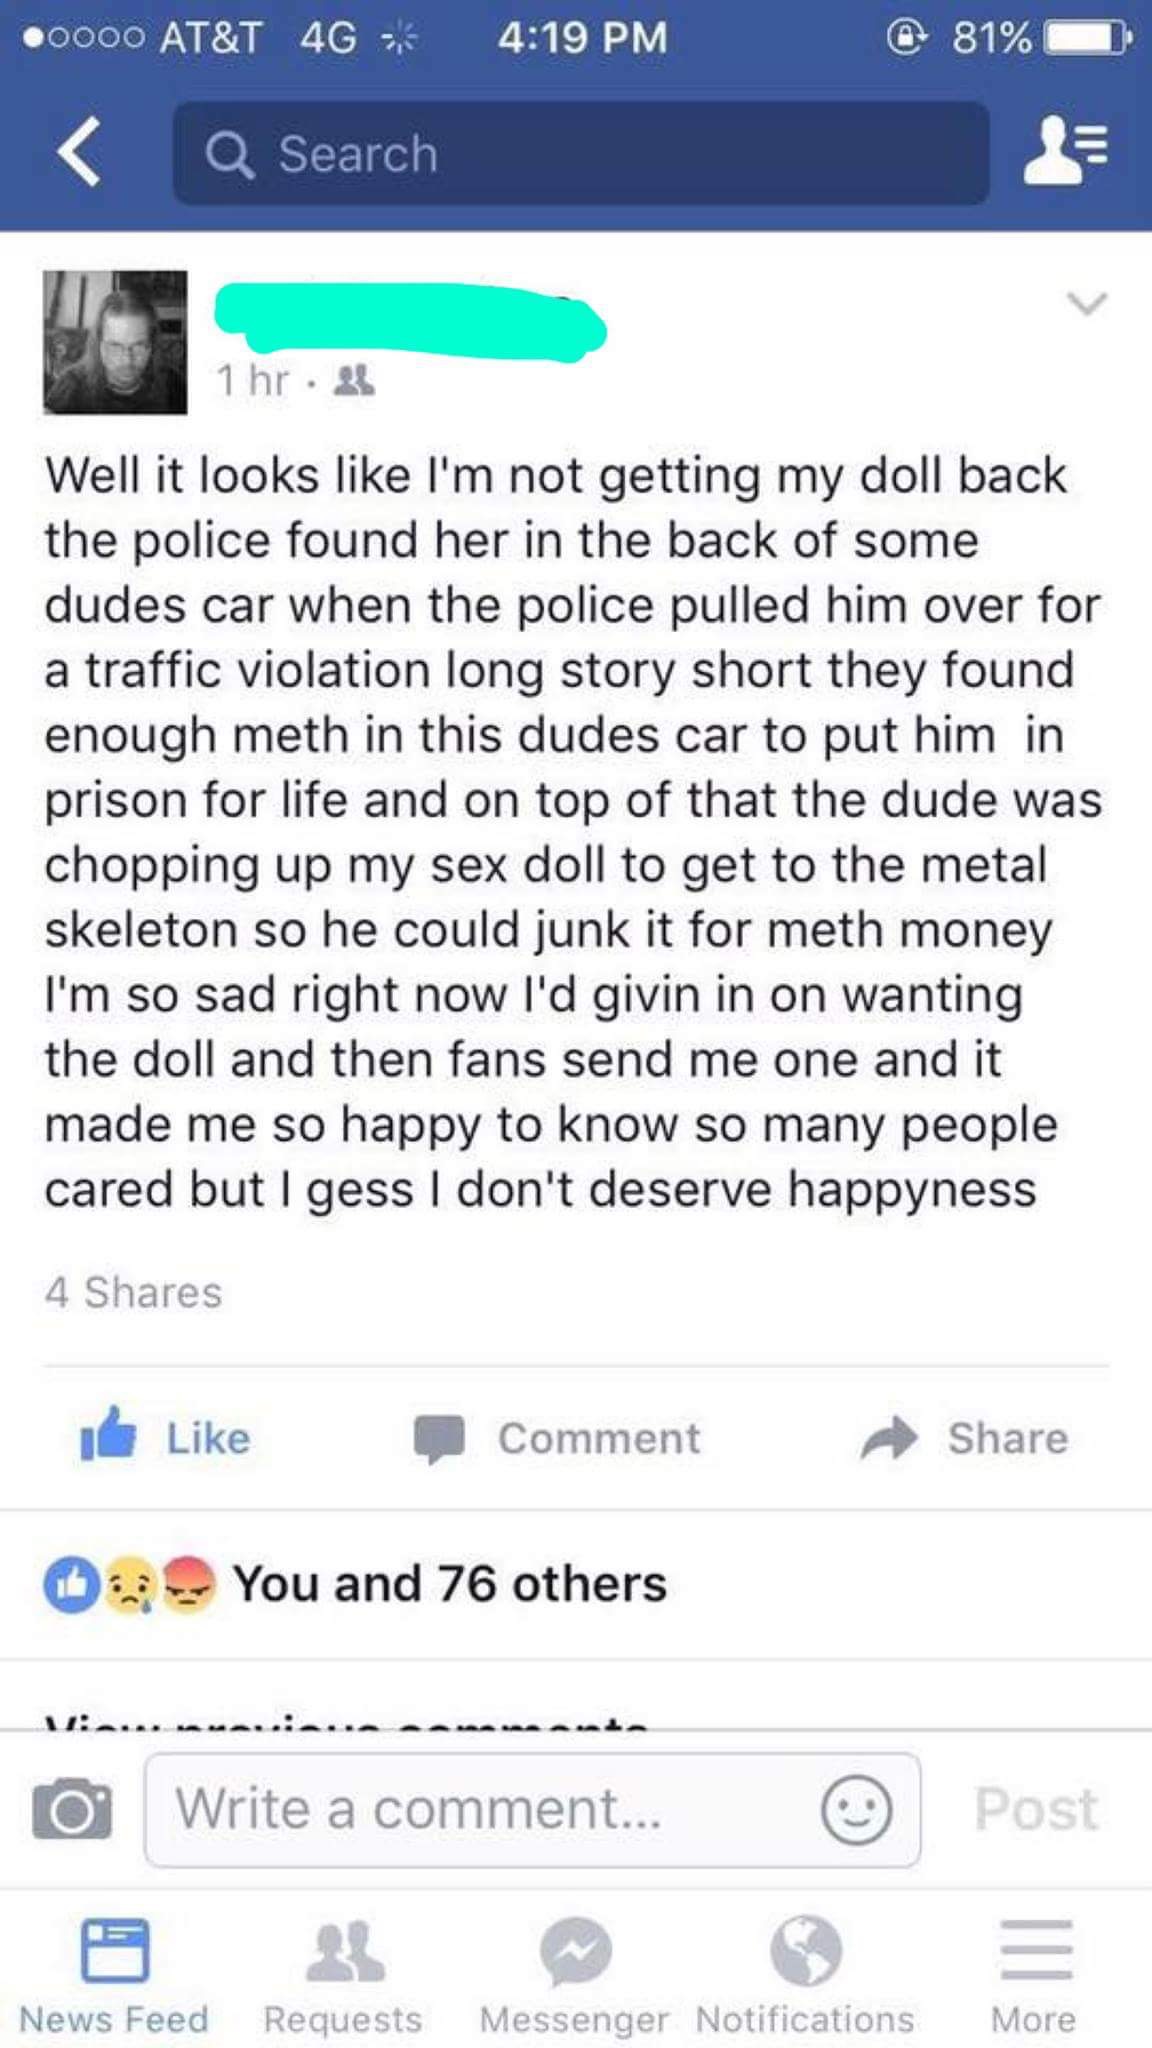 Creep Fails On Social Media After Posting About Stolen Sex Doll